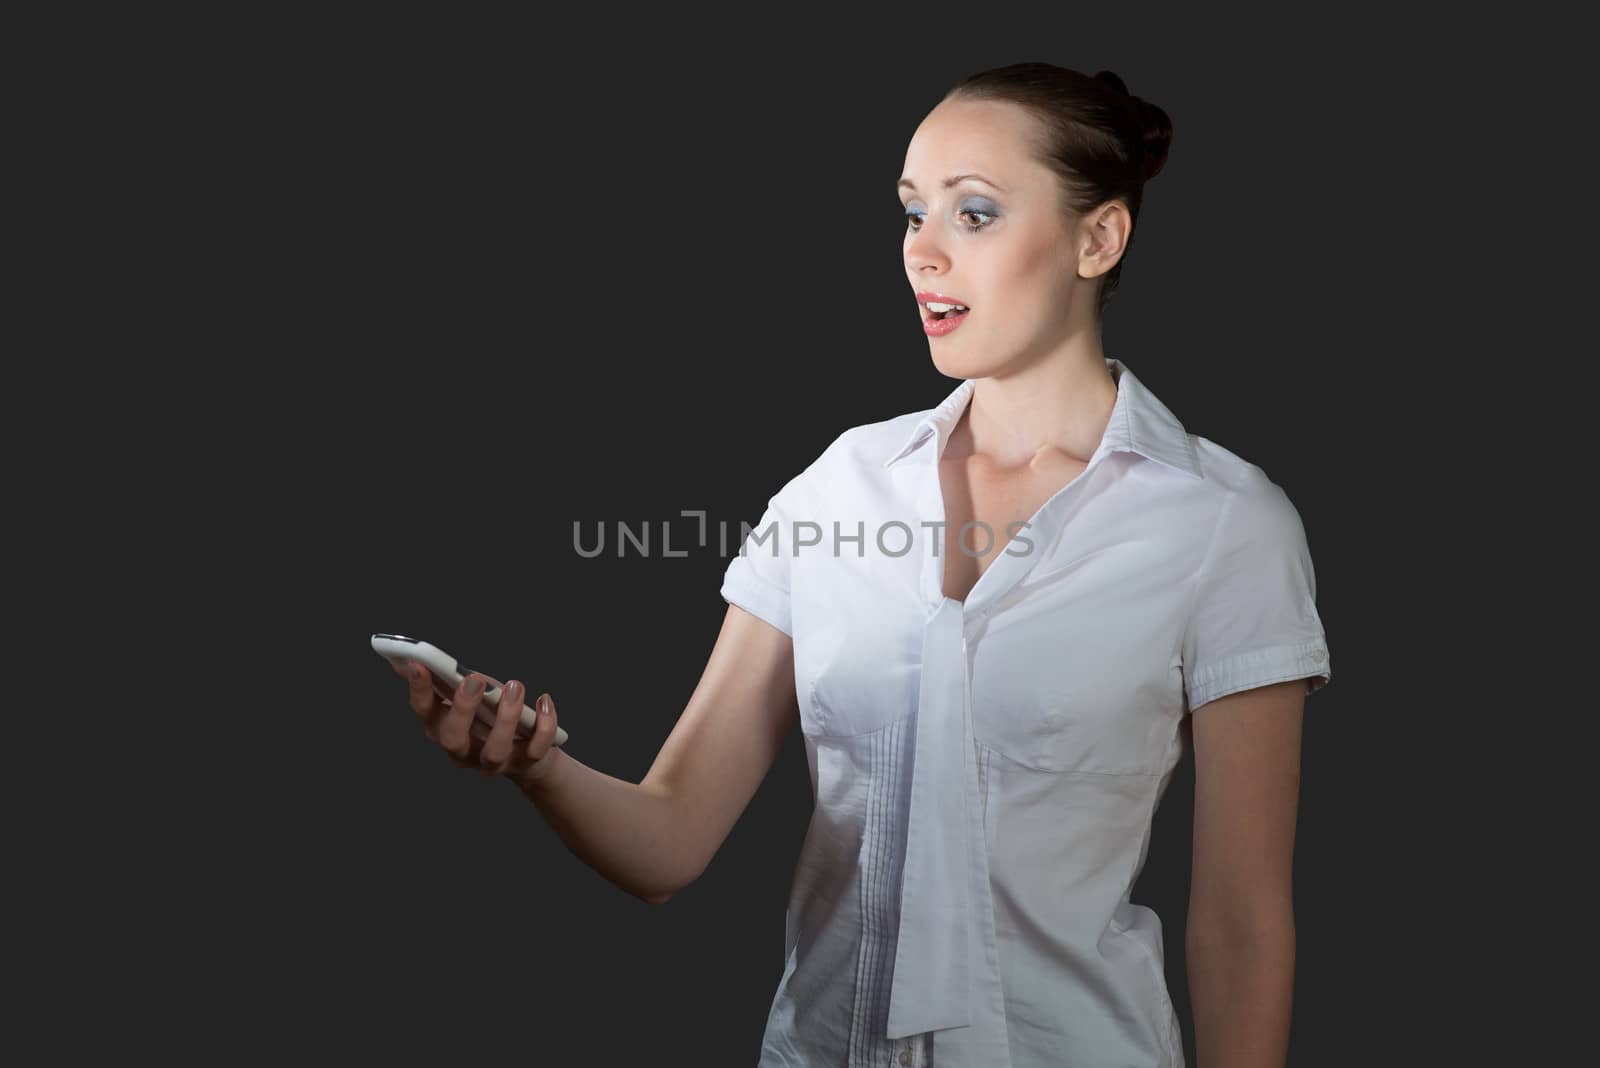 image of young business woman holding acell phone